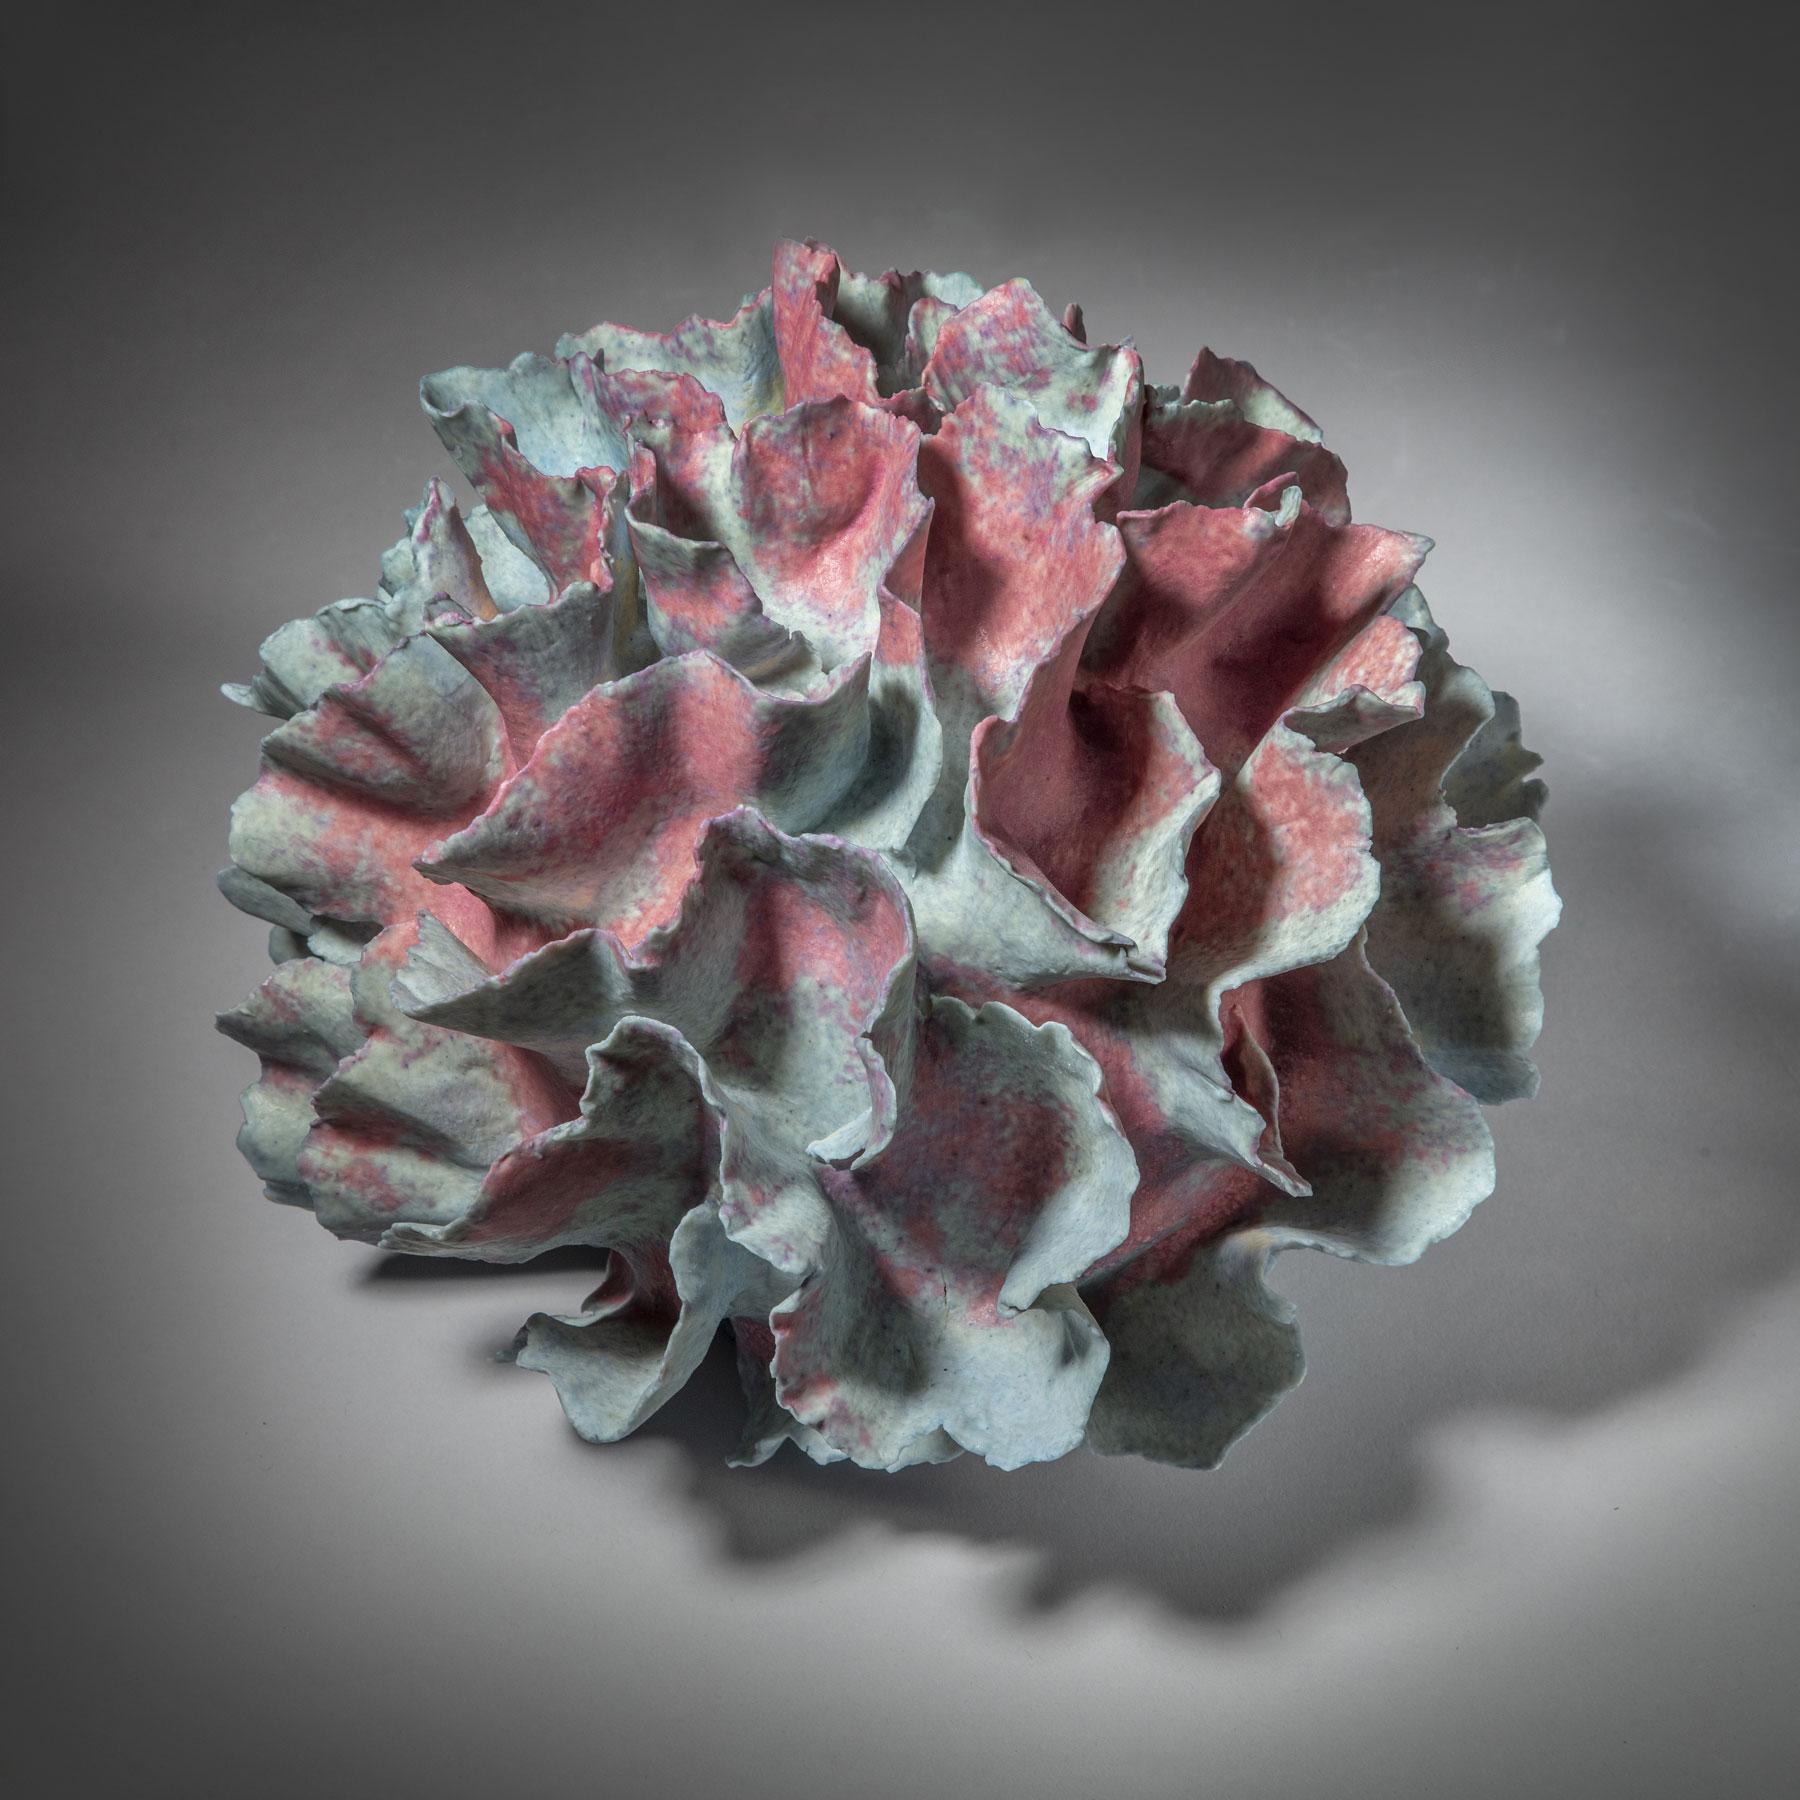 Davolio’s sculptural vessels are inspired by her deep connection to nature, and in particular, to the sea and its magnificent coral reefs. A symphony among craft, design, and art, these handmade objects evoke lightness, complexity, and an